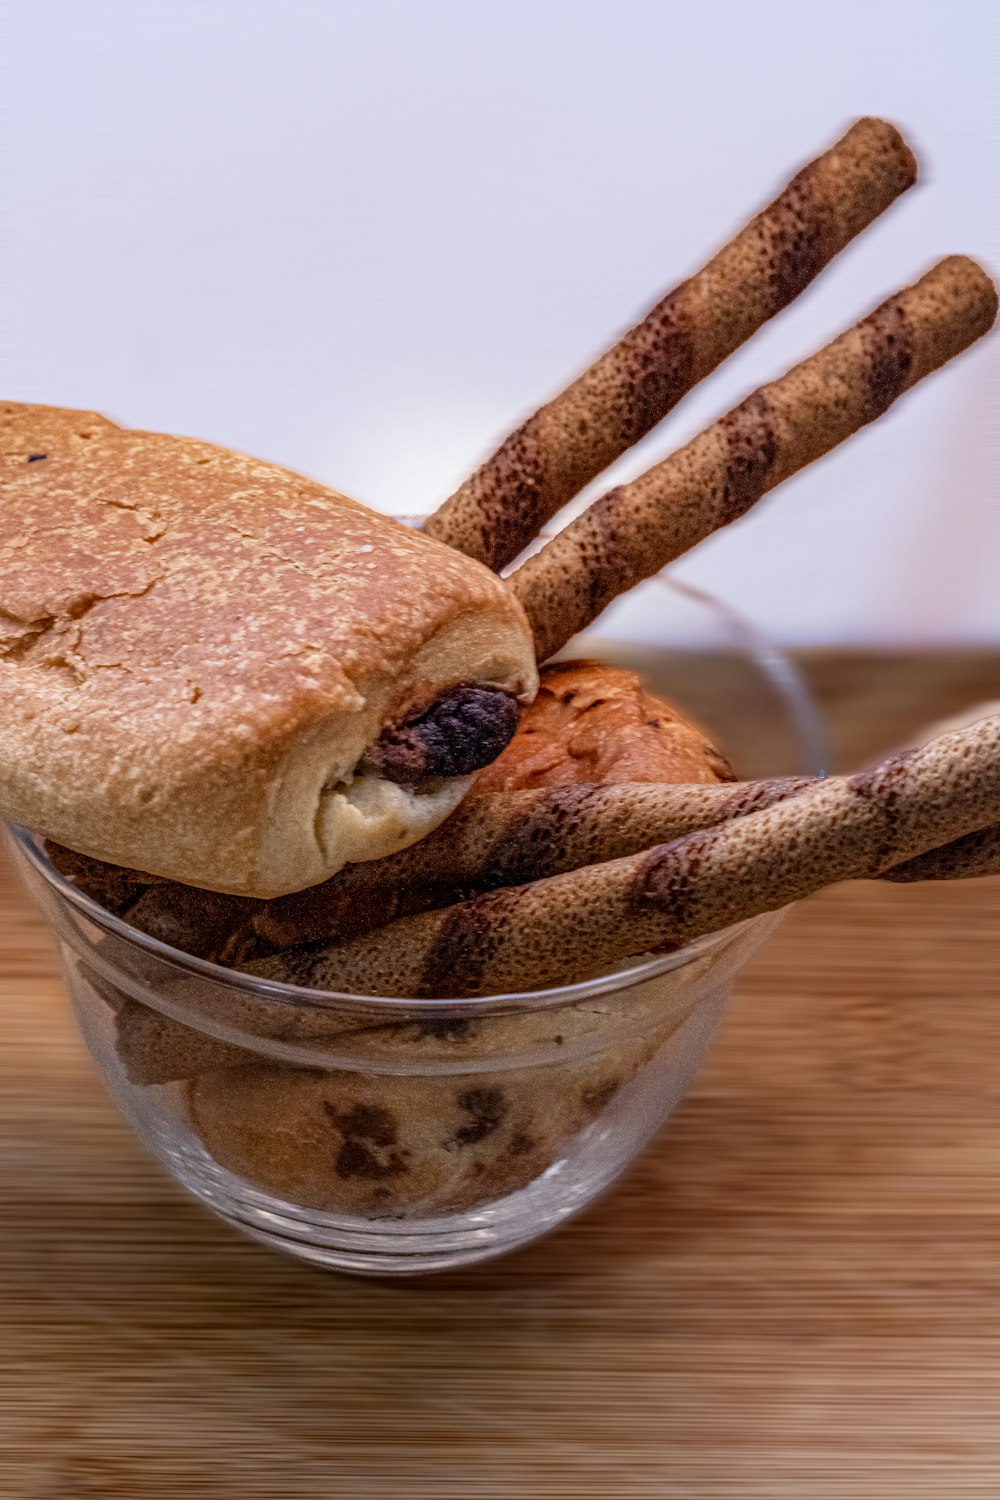 a sandwich in a glass bowl with cinnamon sticks sticking out of it